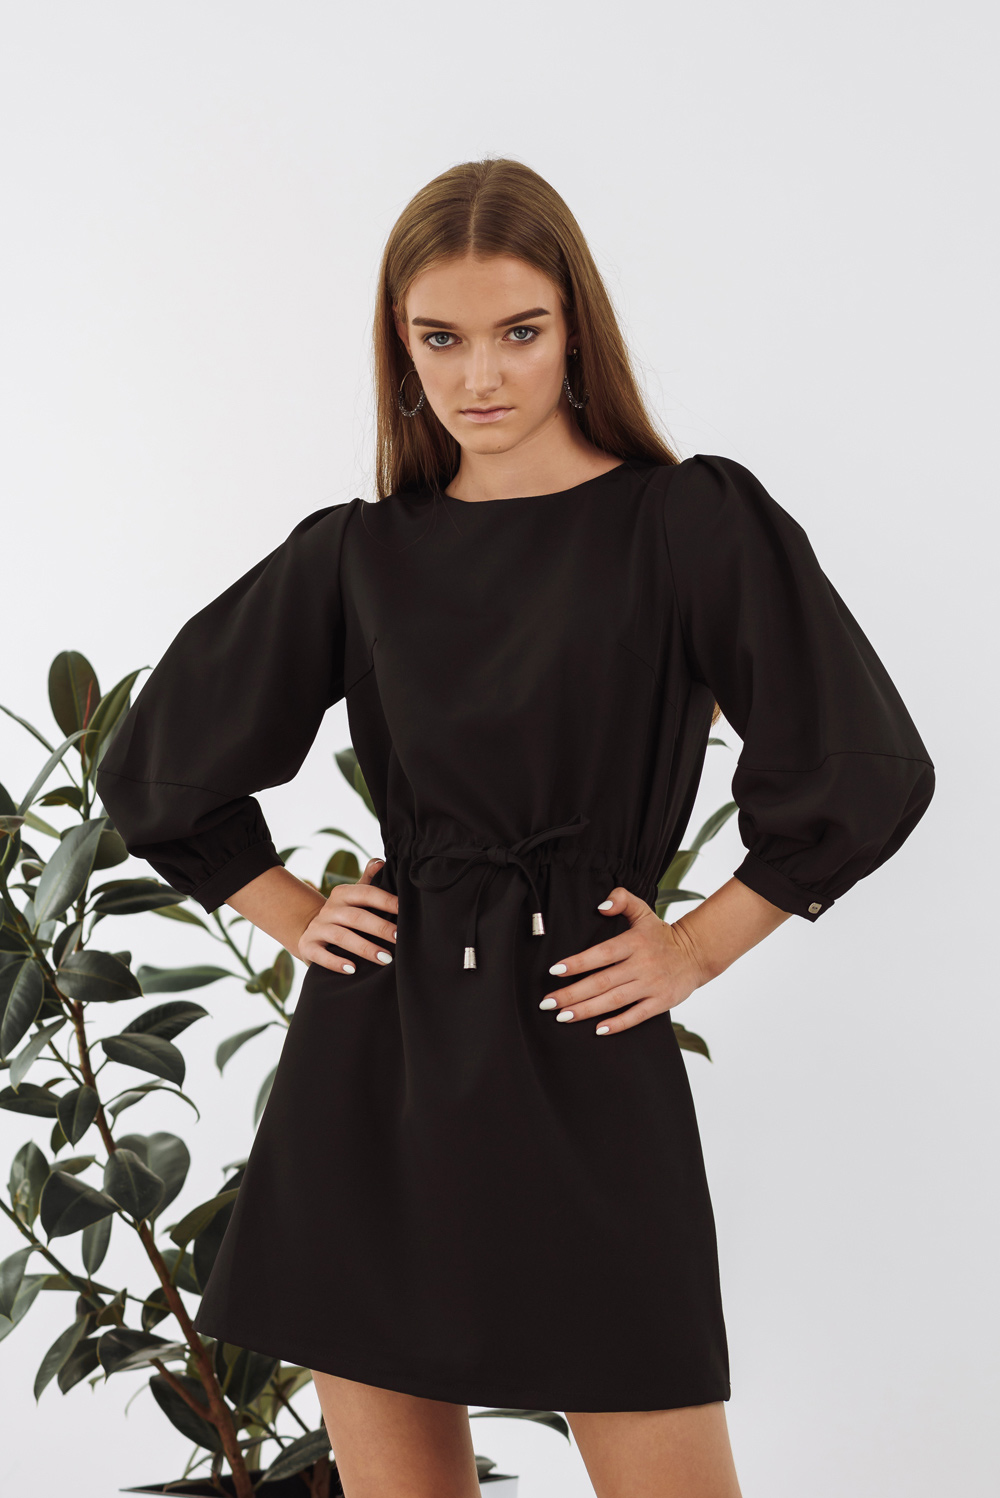 Black dress with puff sleeves